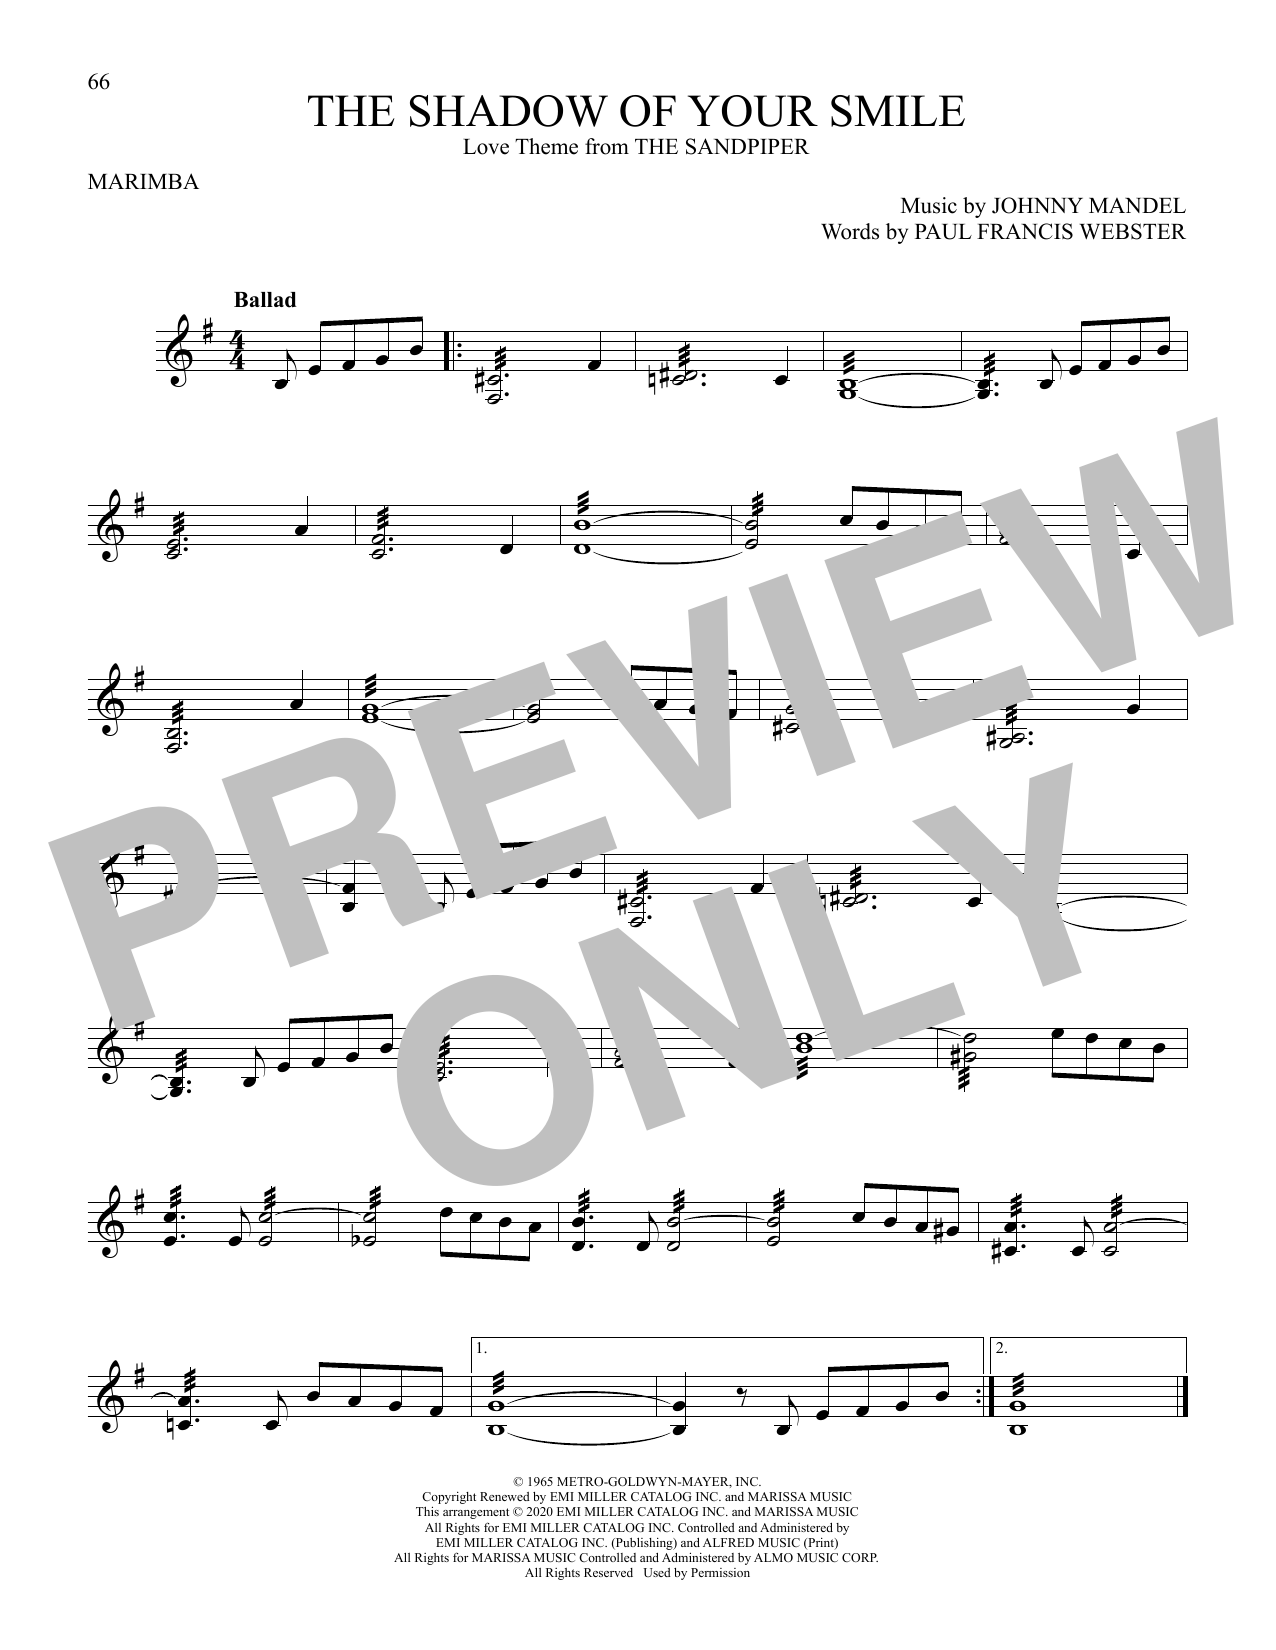 Download Johnny Mandel and Paul Francis Webst The Shadow Of Your Smile Sheet Music